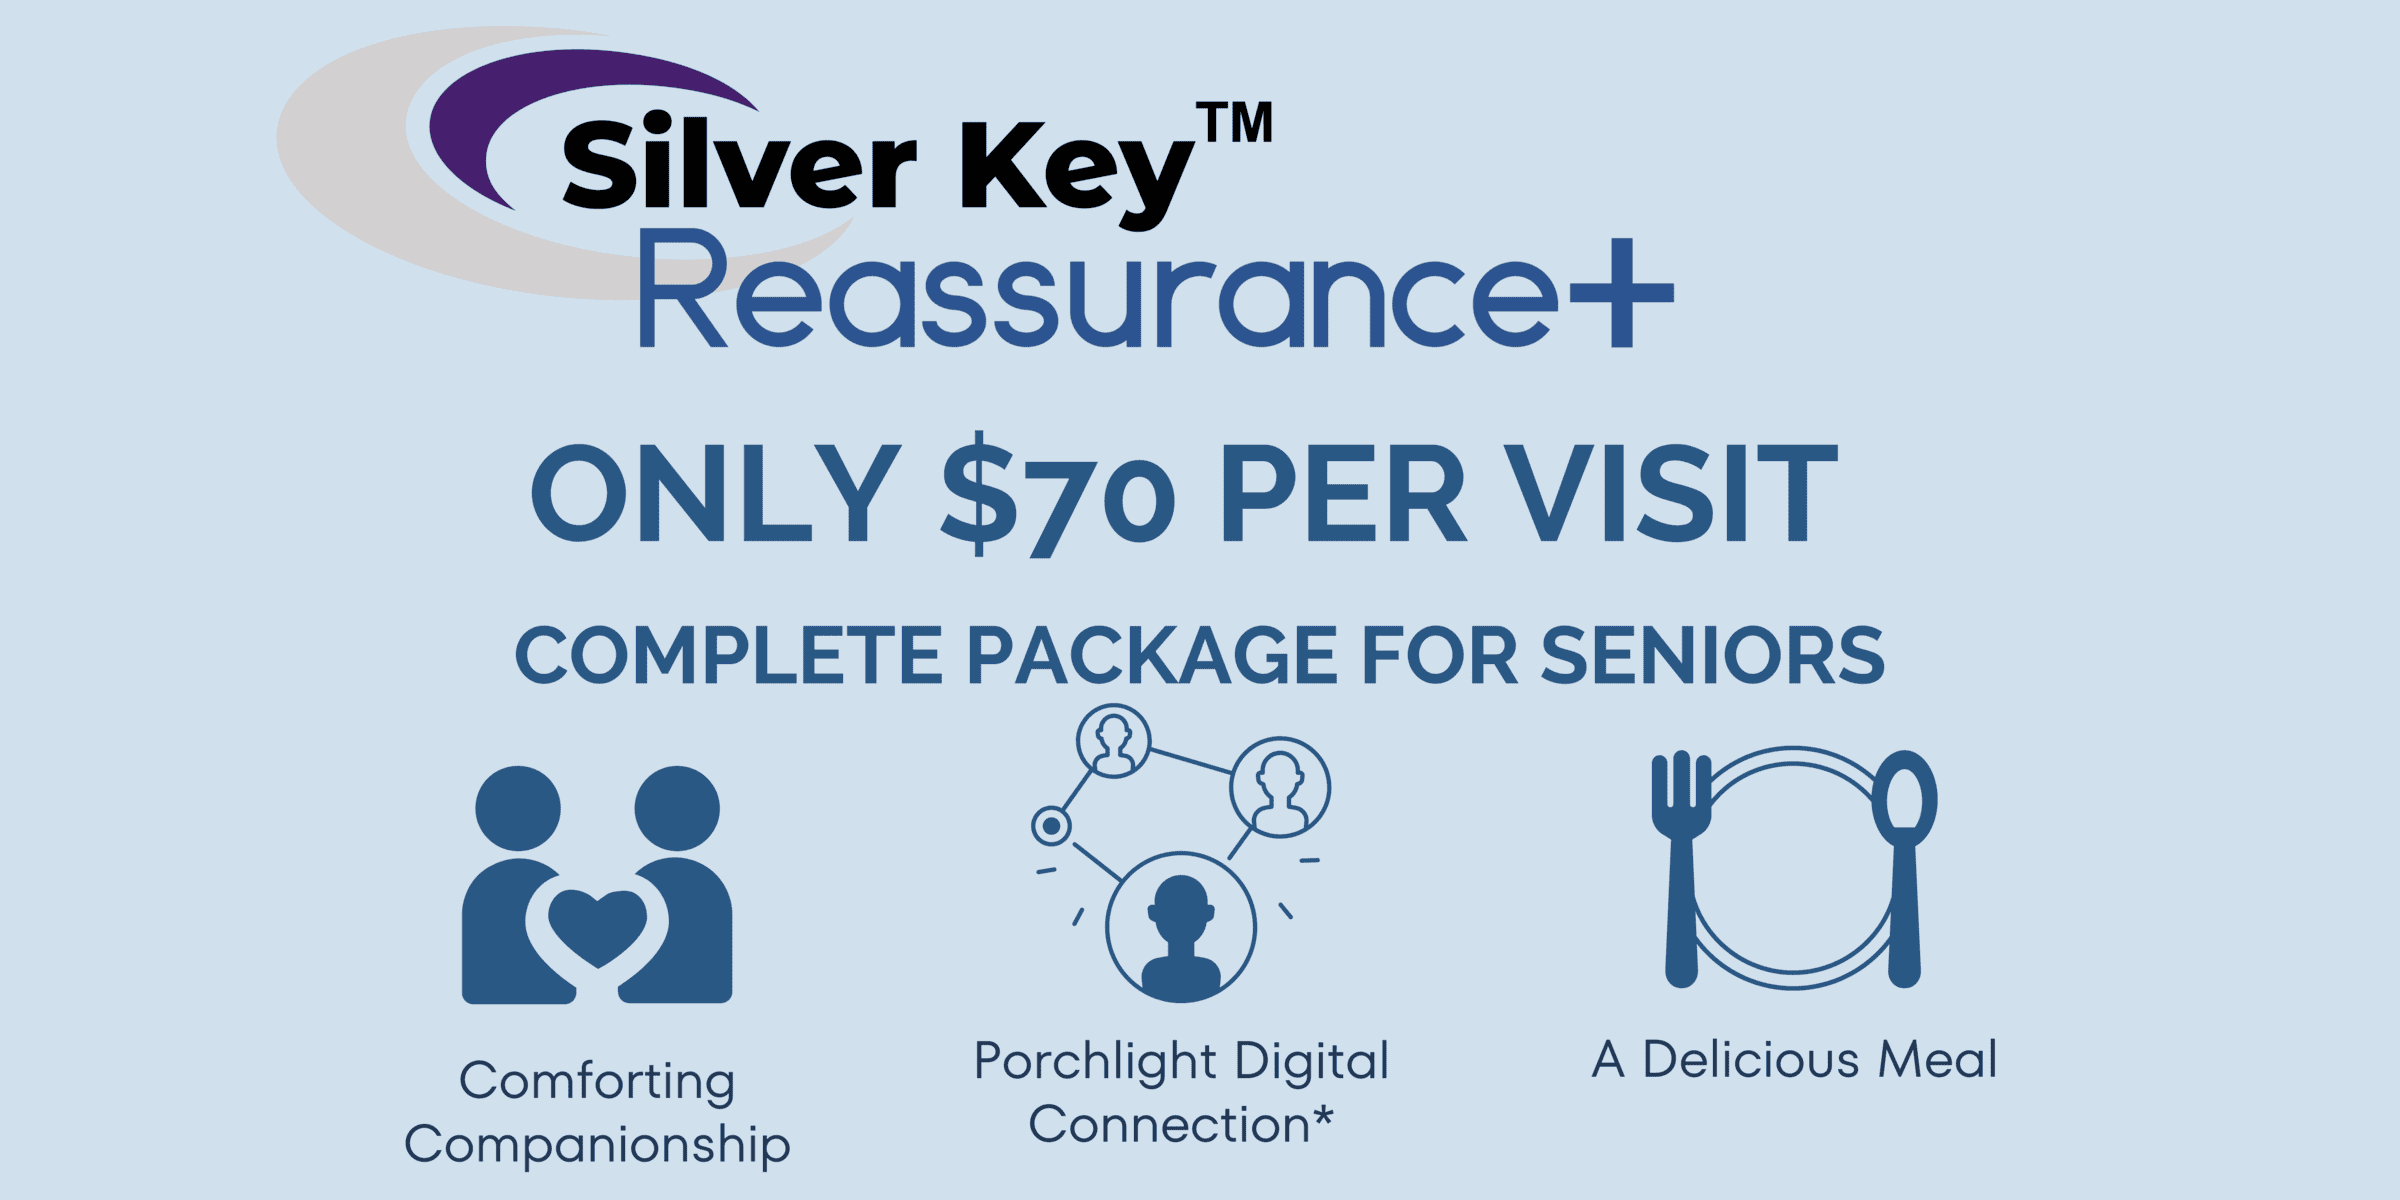 Companionship at Silver Key is Caring for you, like family.